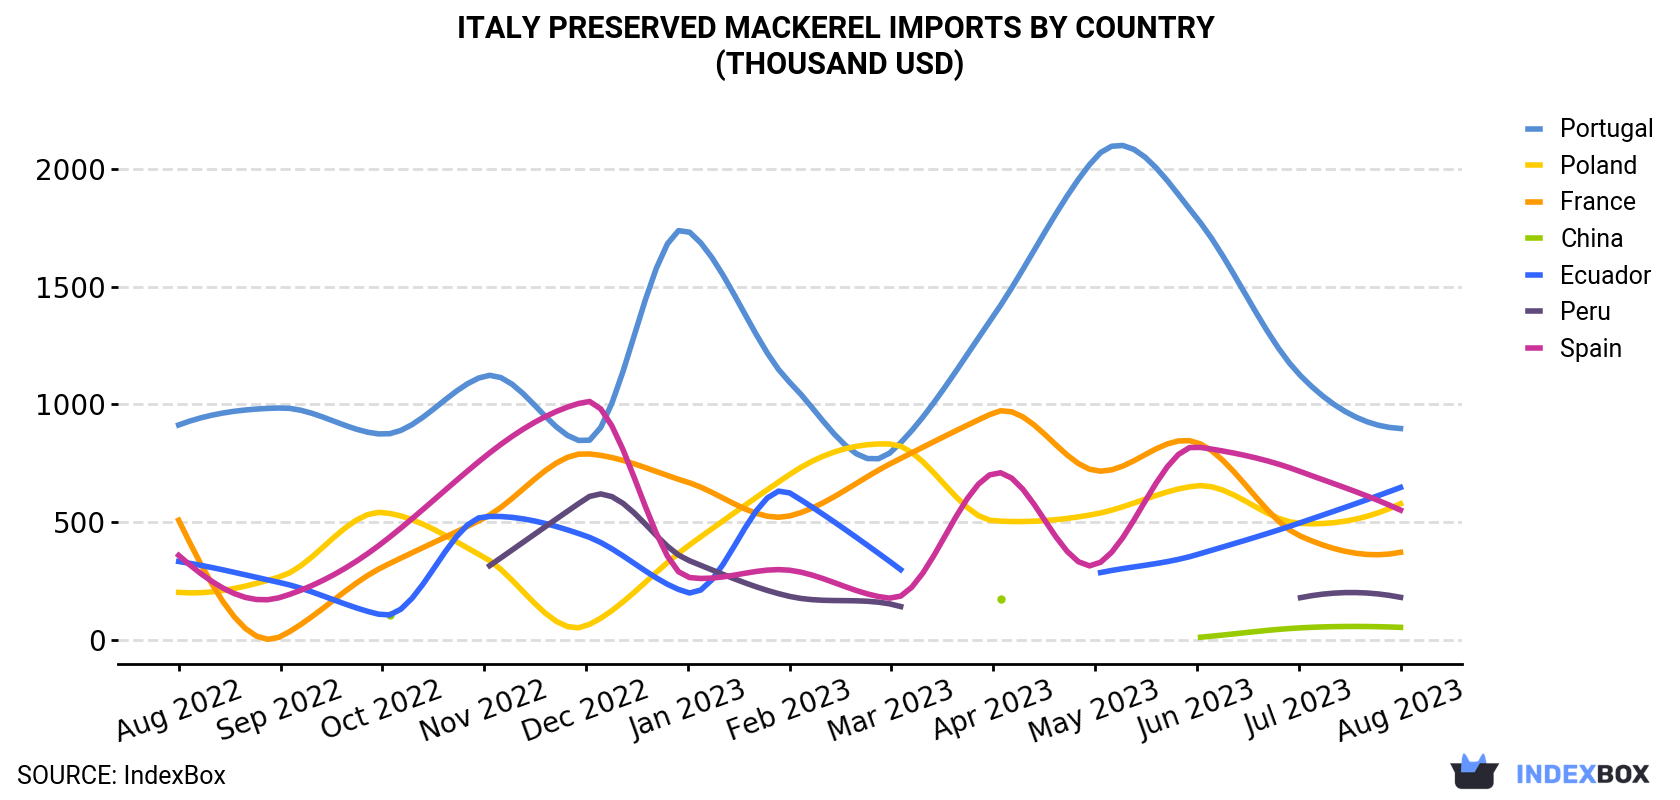 Italy Preserved Mackerel Imports By Country (Thousand USD)